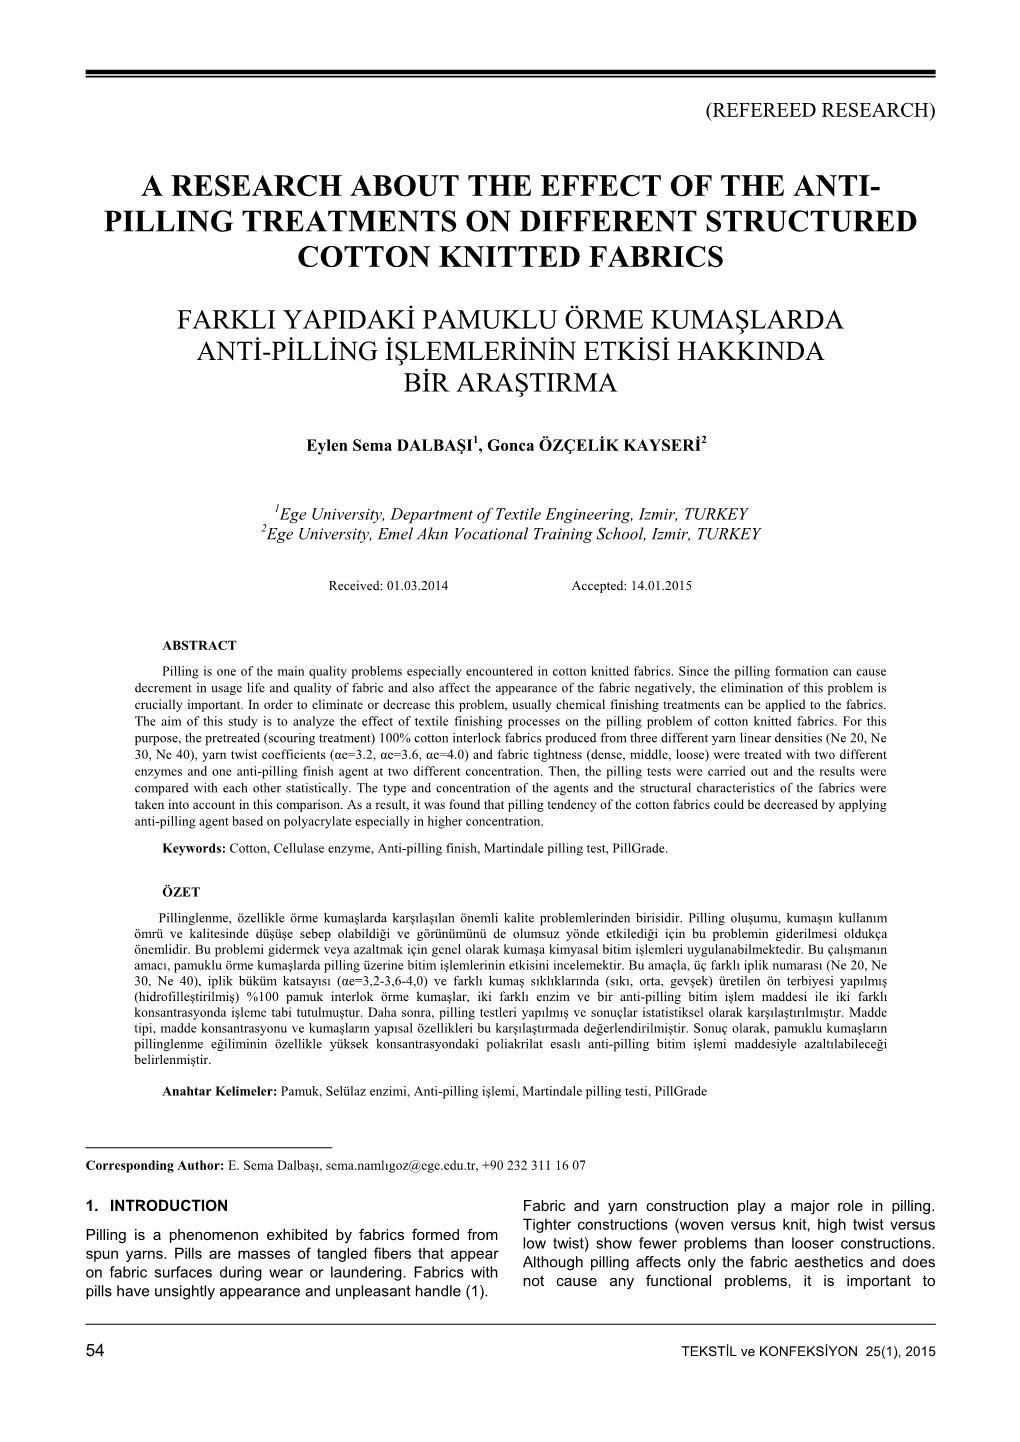 Pilling Treatments on Different Structured Cotton Knitted Fabrics